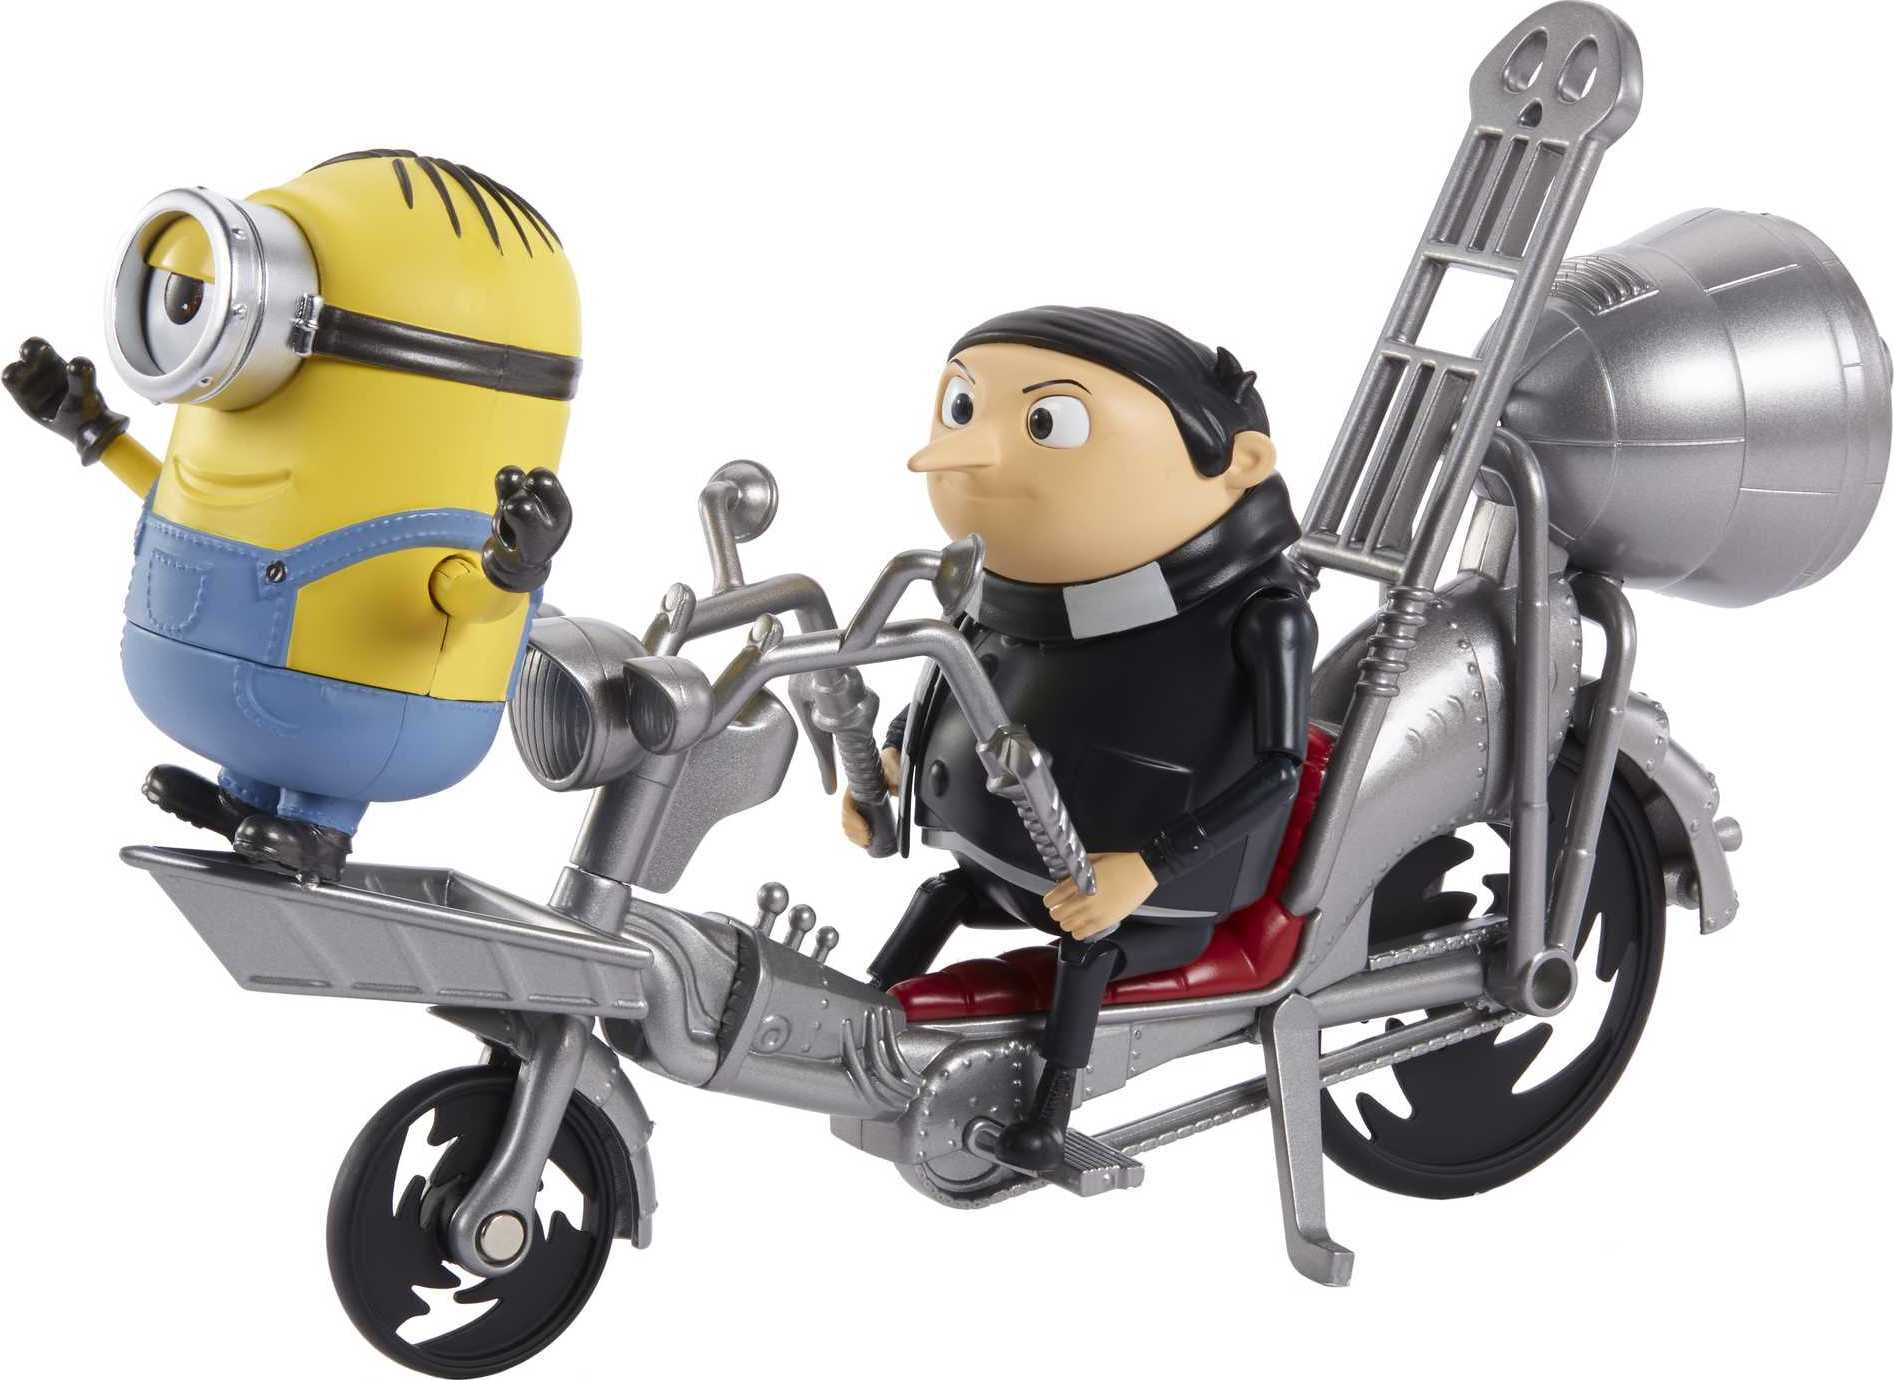 Details about   Imaginext Minions The Rise Of Gru Rocket Bike with 6 pack of characters 